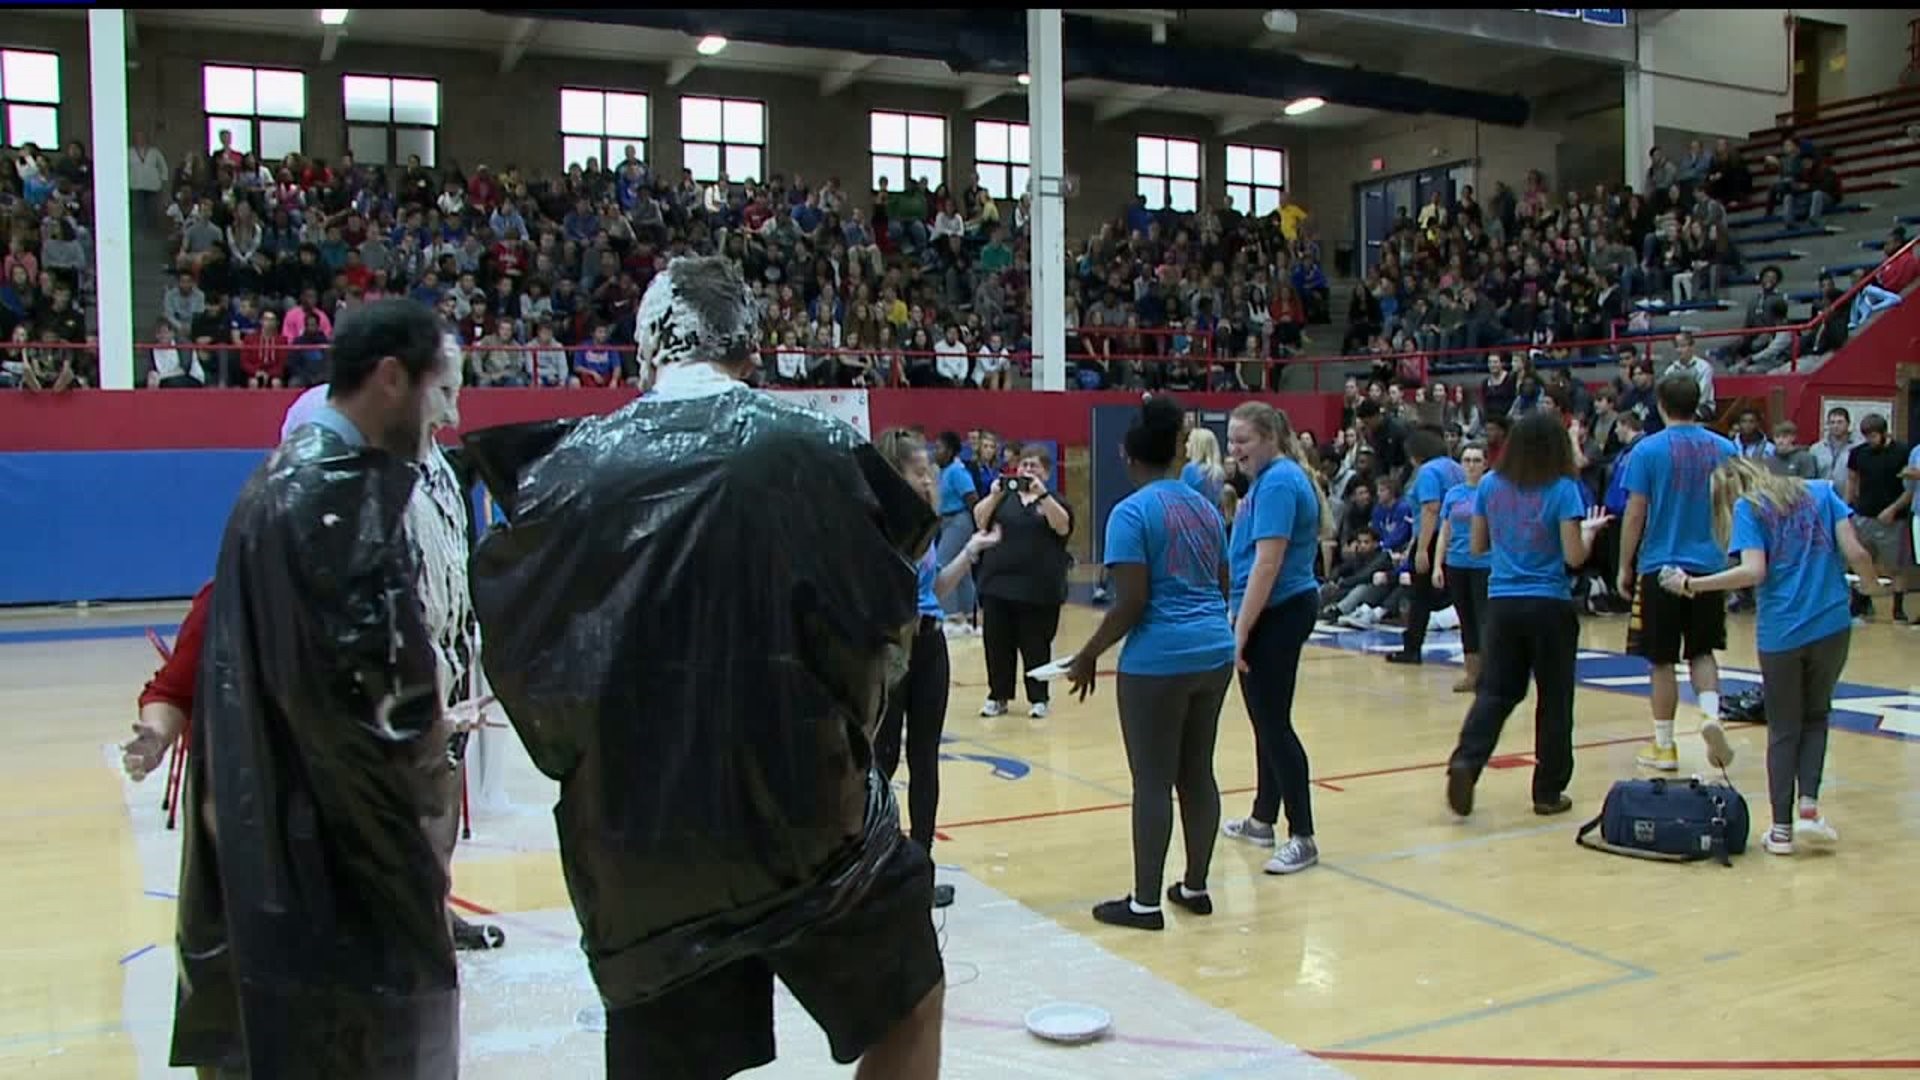 Central teachers get pie to the face